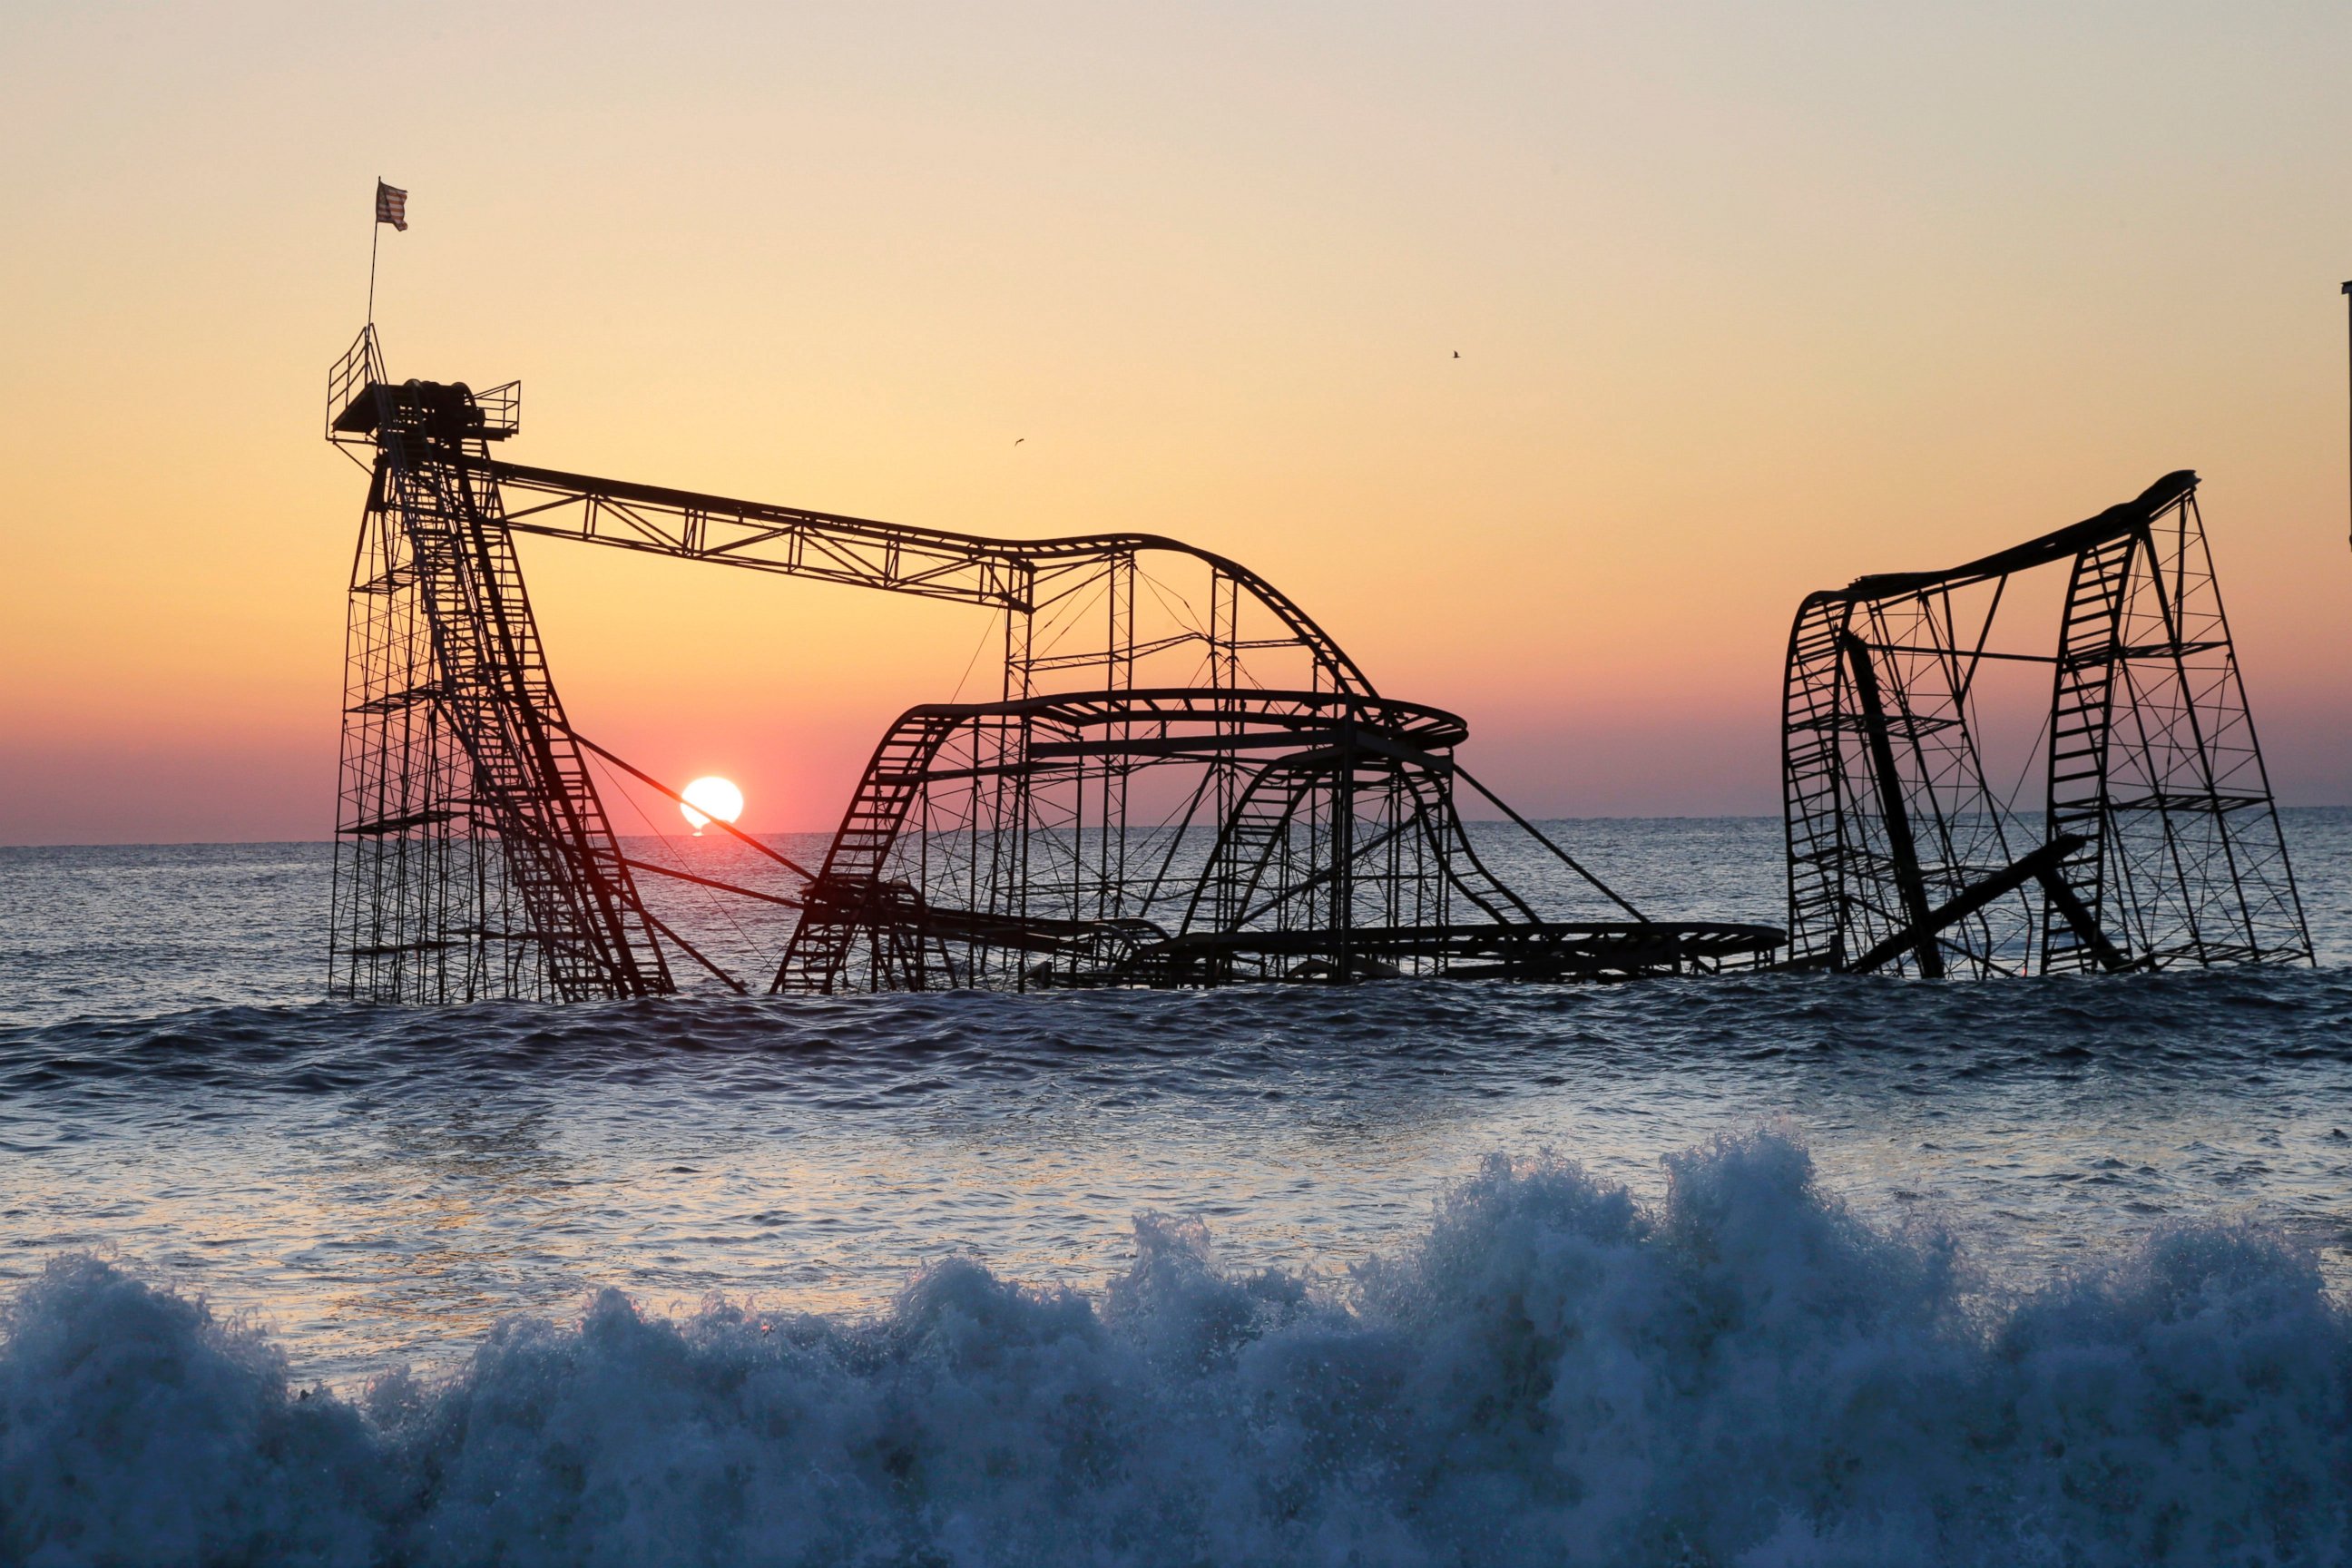 PHOTO: The sun rises in Seaside Heights, N.J., Feb. 25, 2013, behind the Jet Star Roller Coaster which was sitting in the ocean after part of the Funtown Pier was destroyed during Superstorm Sandy.